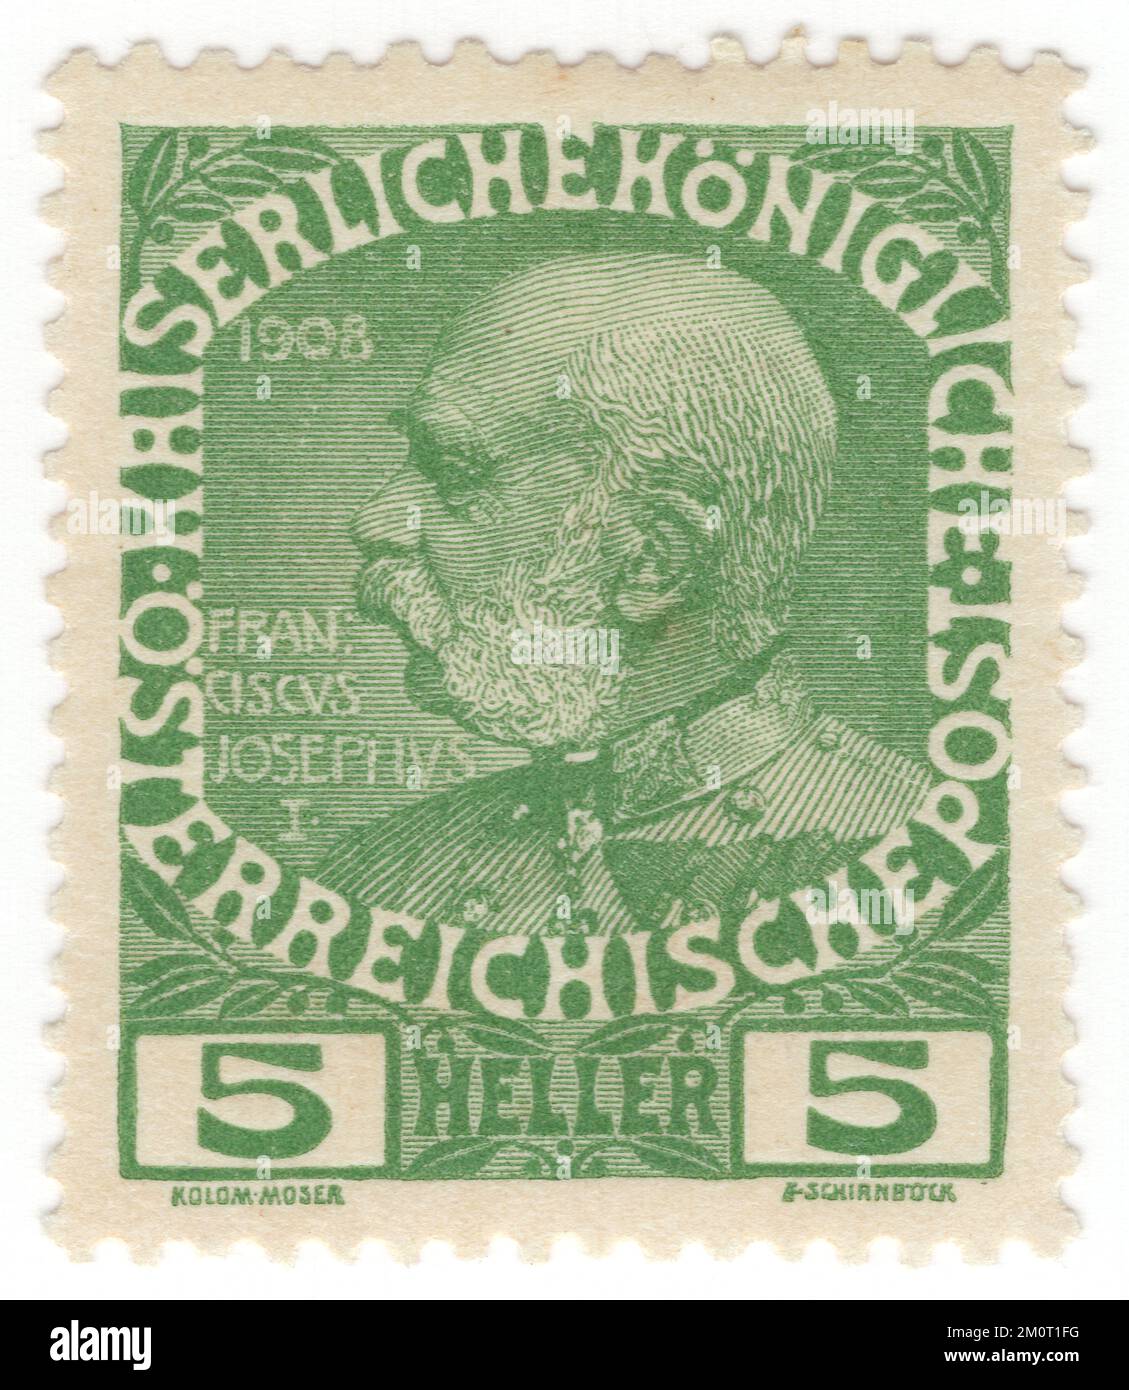 AUSTRIA — 1913: An 5 heller yellow-green postage stamp depicting portrait of Franz Joseph I. Definitive set issued for the 60th year of the reign of Austrian Monarch Franz Josef, Emperor of Austria, King of Hungary, and the other states of the Habsburg monarchy. Franz Joseph I or Francis Joseph I  was Emperor of Austria, King of Hungary, and the other states of the Habsburg monarchy from 2 December 1848 until his death on 21 November 1916.[1] In the early part of his reign, his realms and territories were referred to as the Austrian Empire, but were reconstituted as the dual monarchy Stock Photo